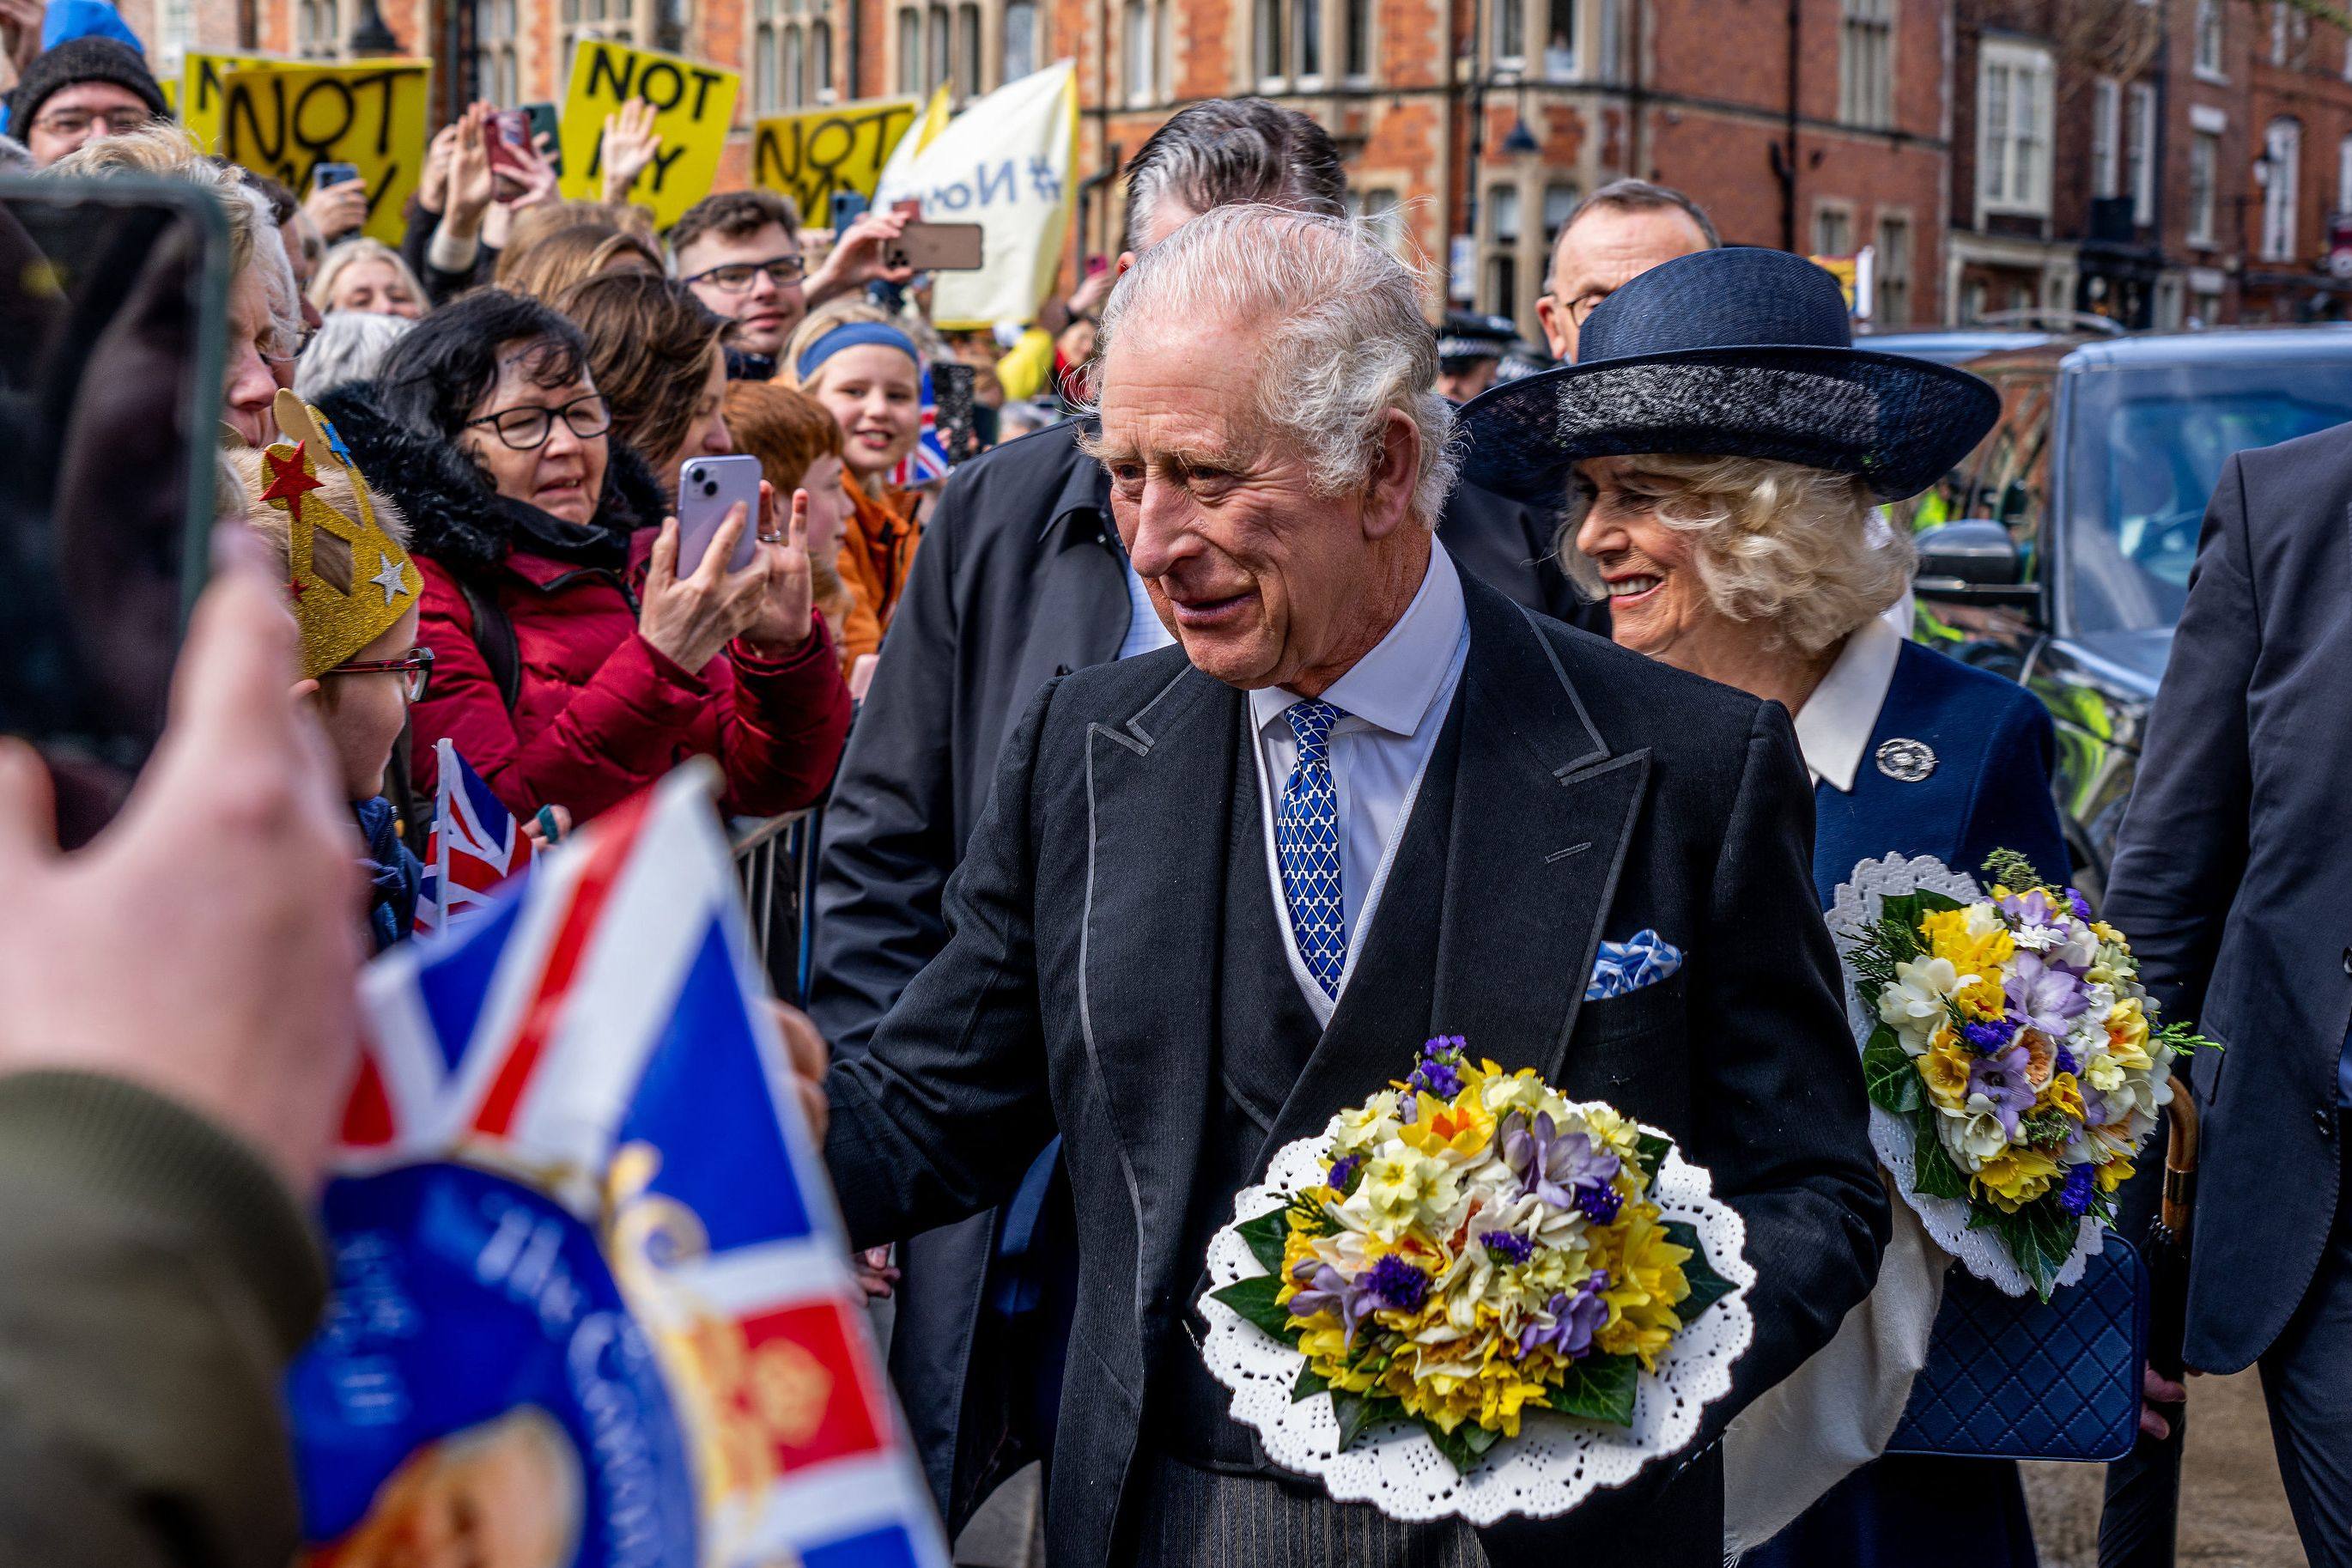 Britain’s King Charles and his wife Camilla speak to well-wishers in York Minster, England on Thursday. Photo: AFP